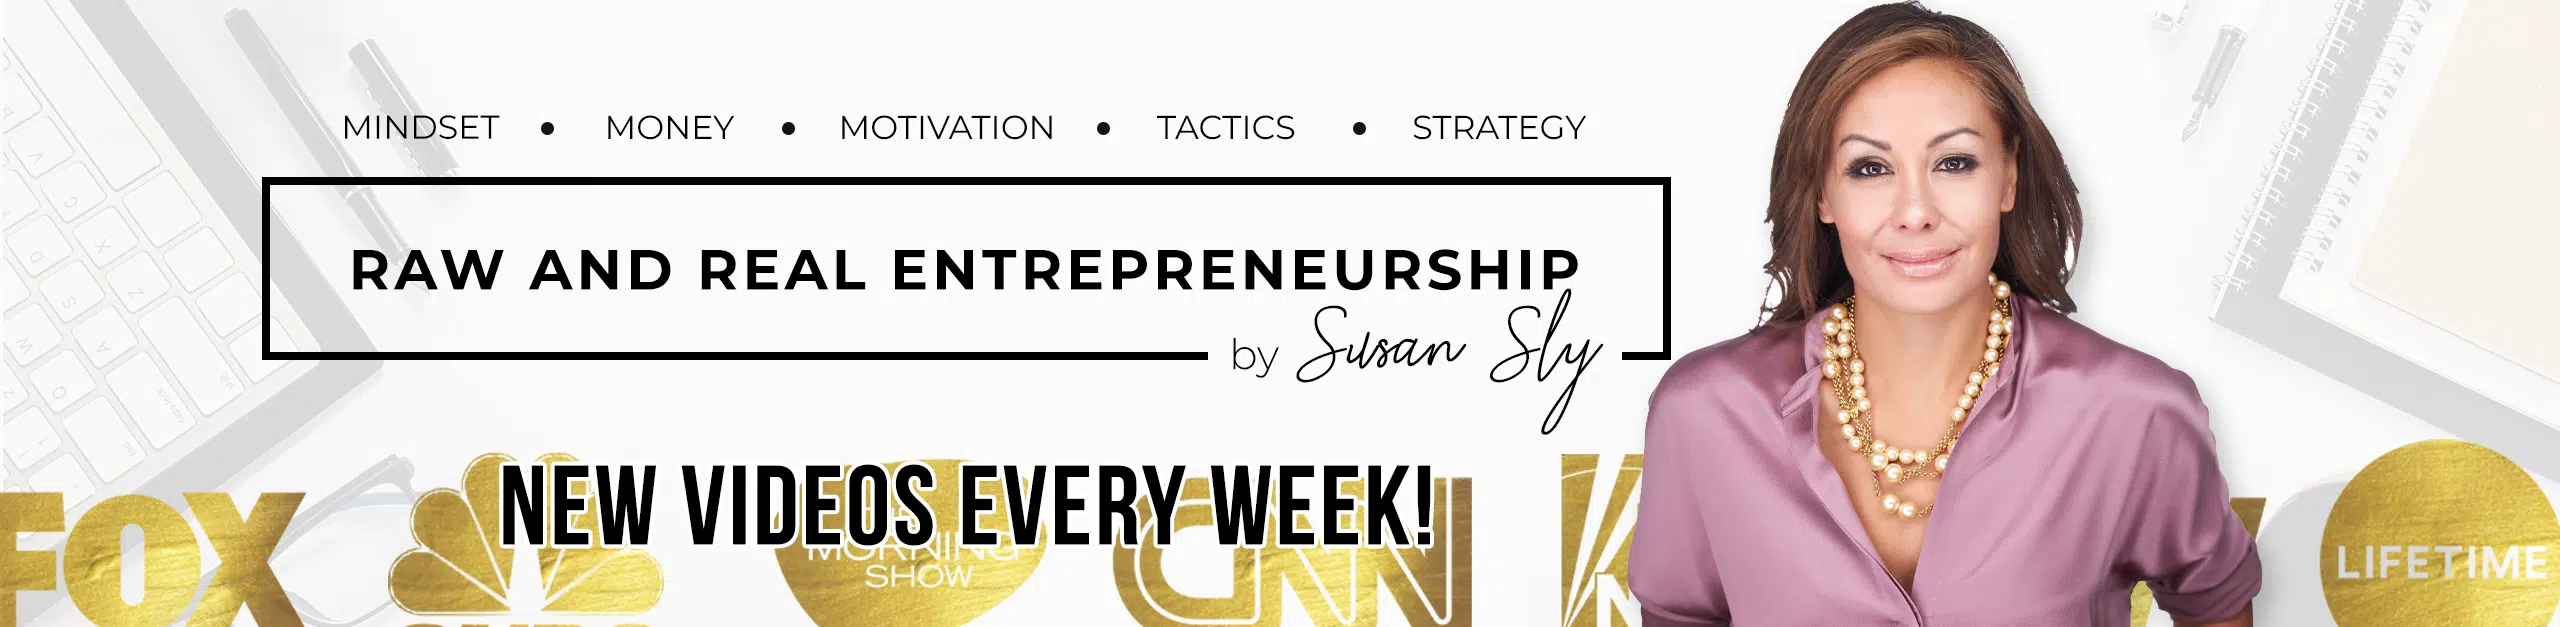 Raw and Real Entrepreneurship with Susan Sly